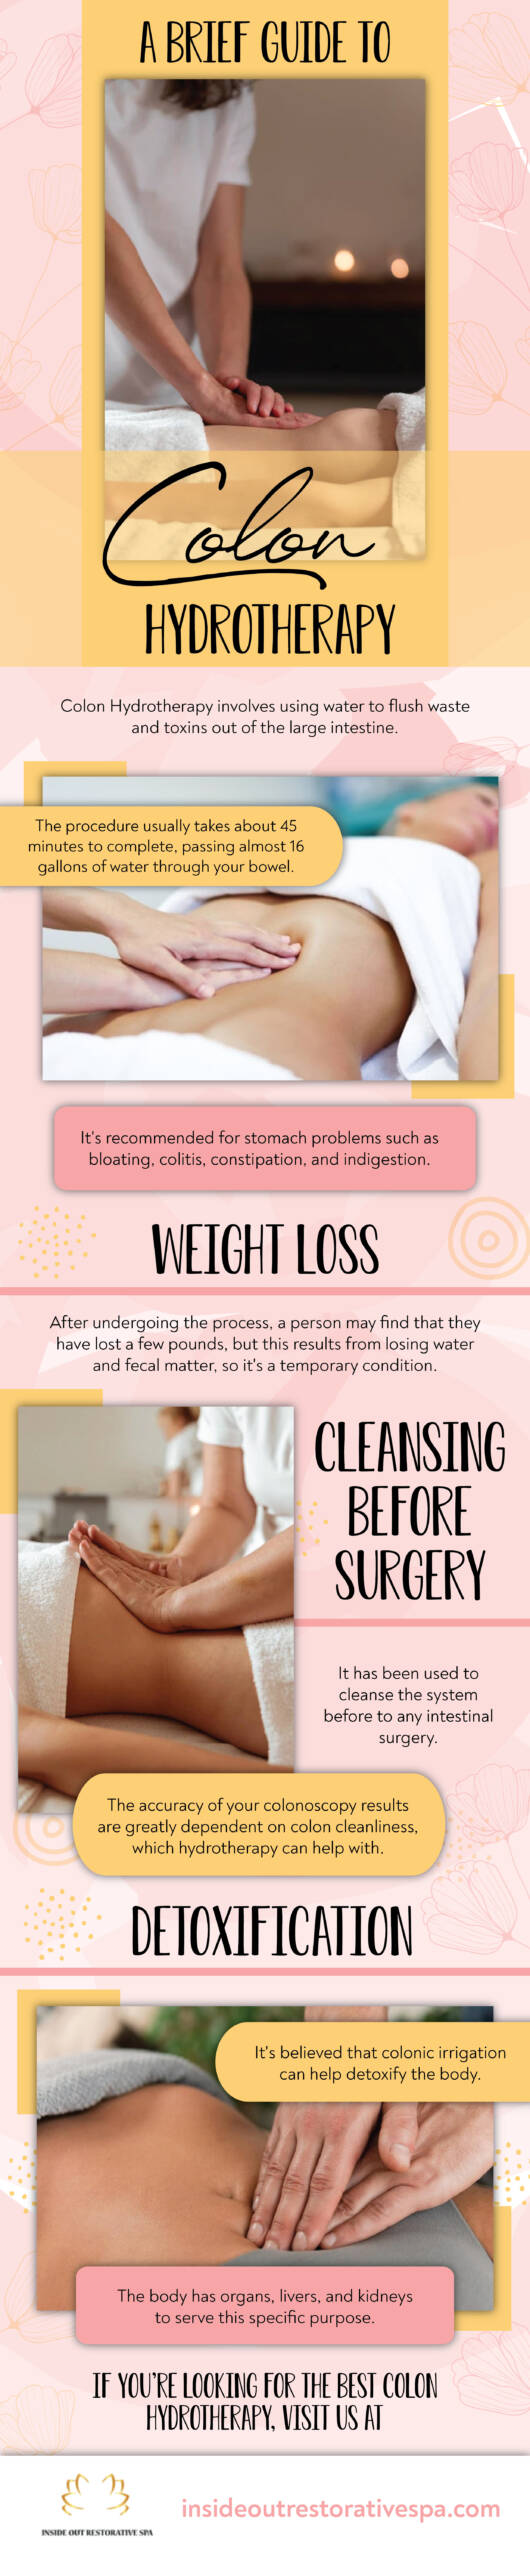 A Brief Guide To Colon Hydrotherapy - Infograph